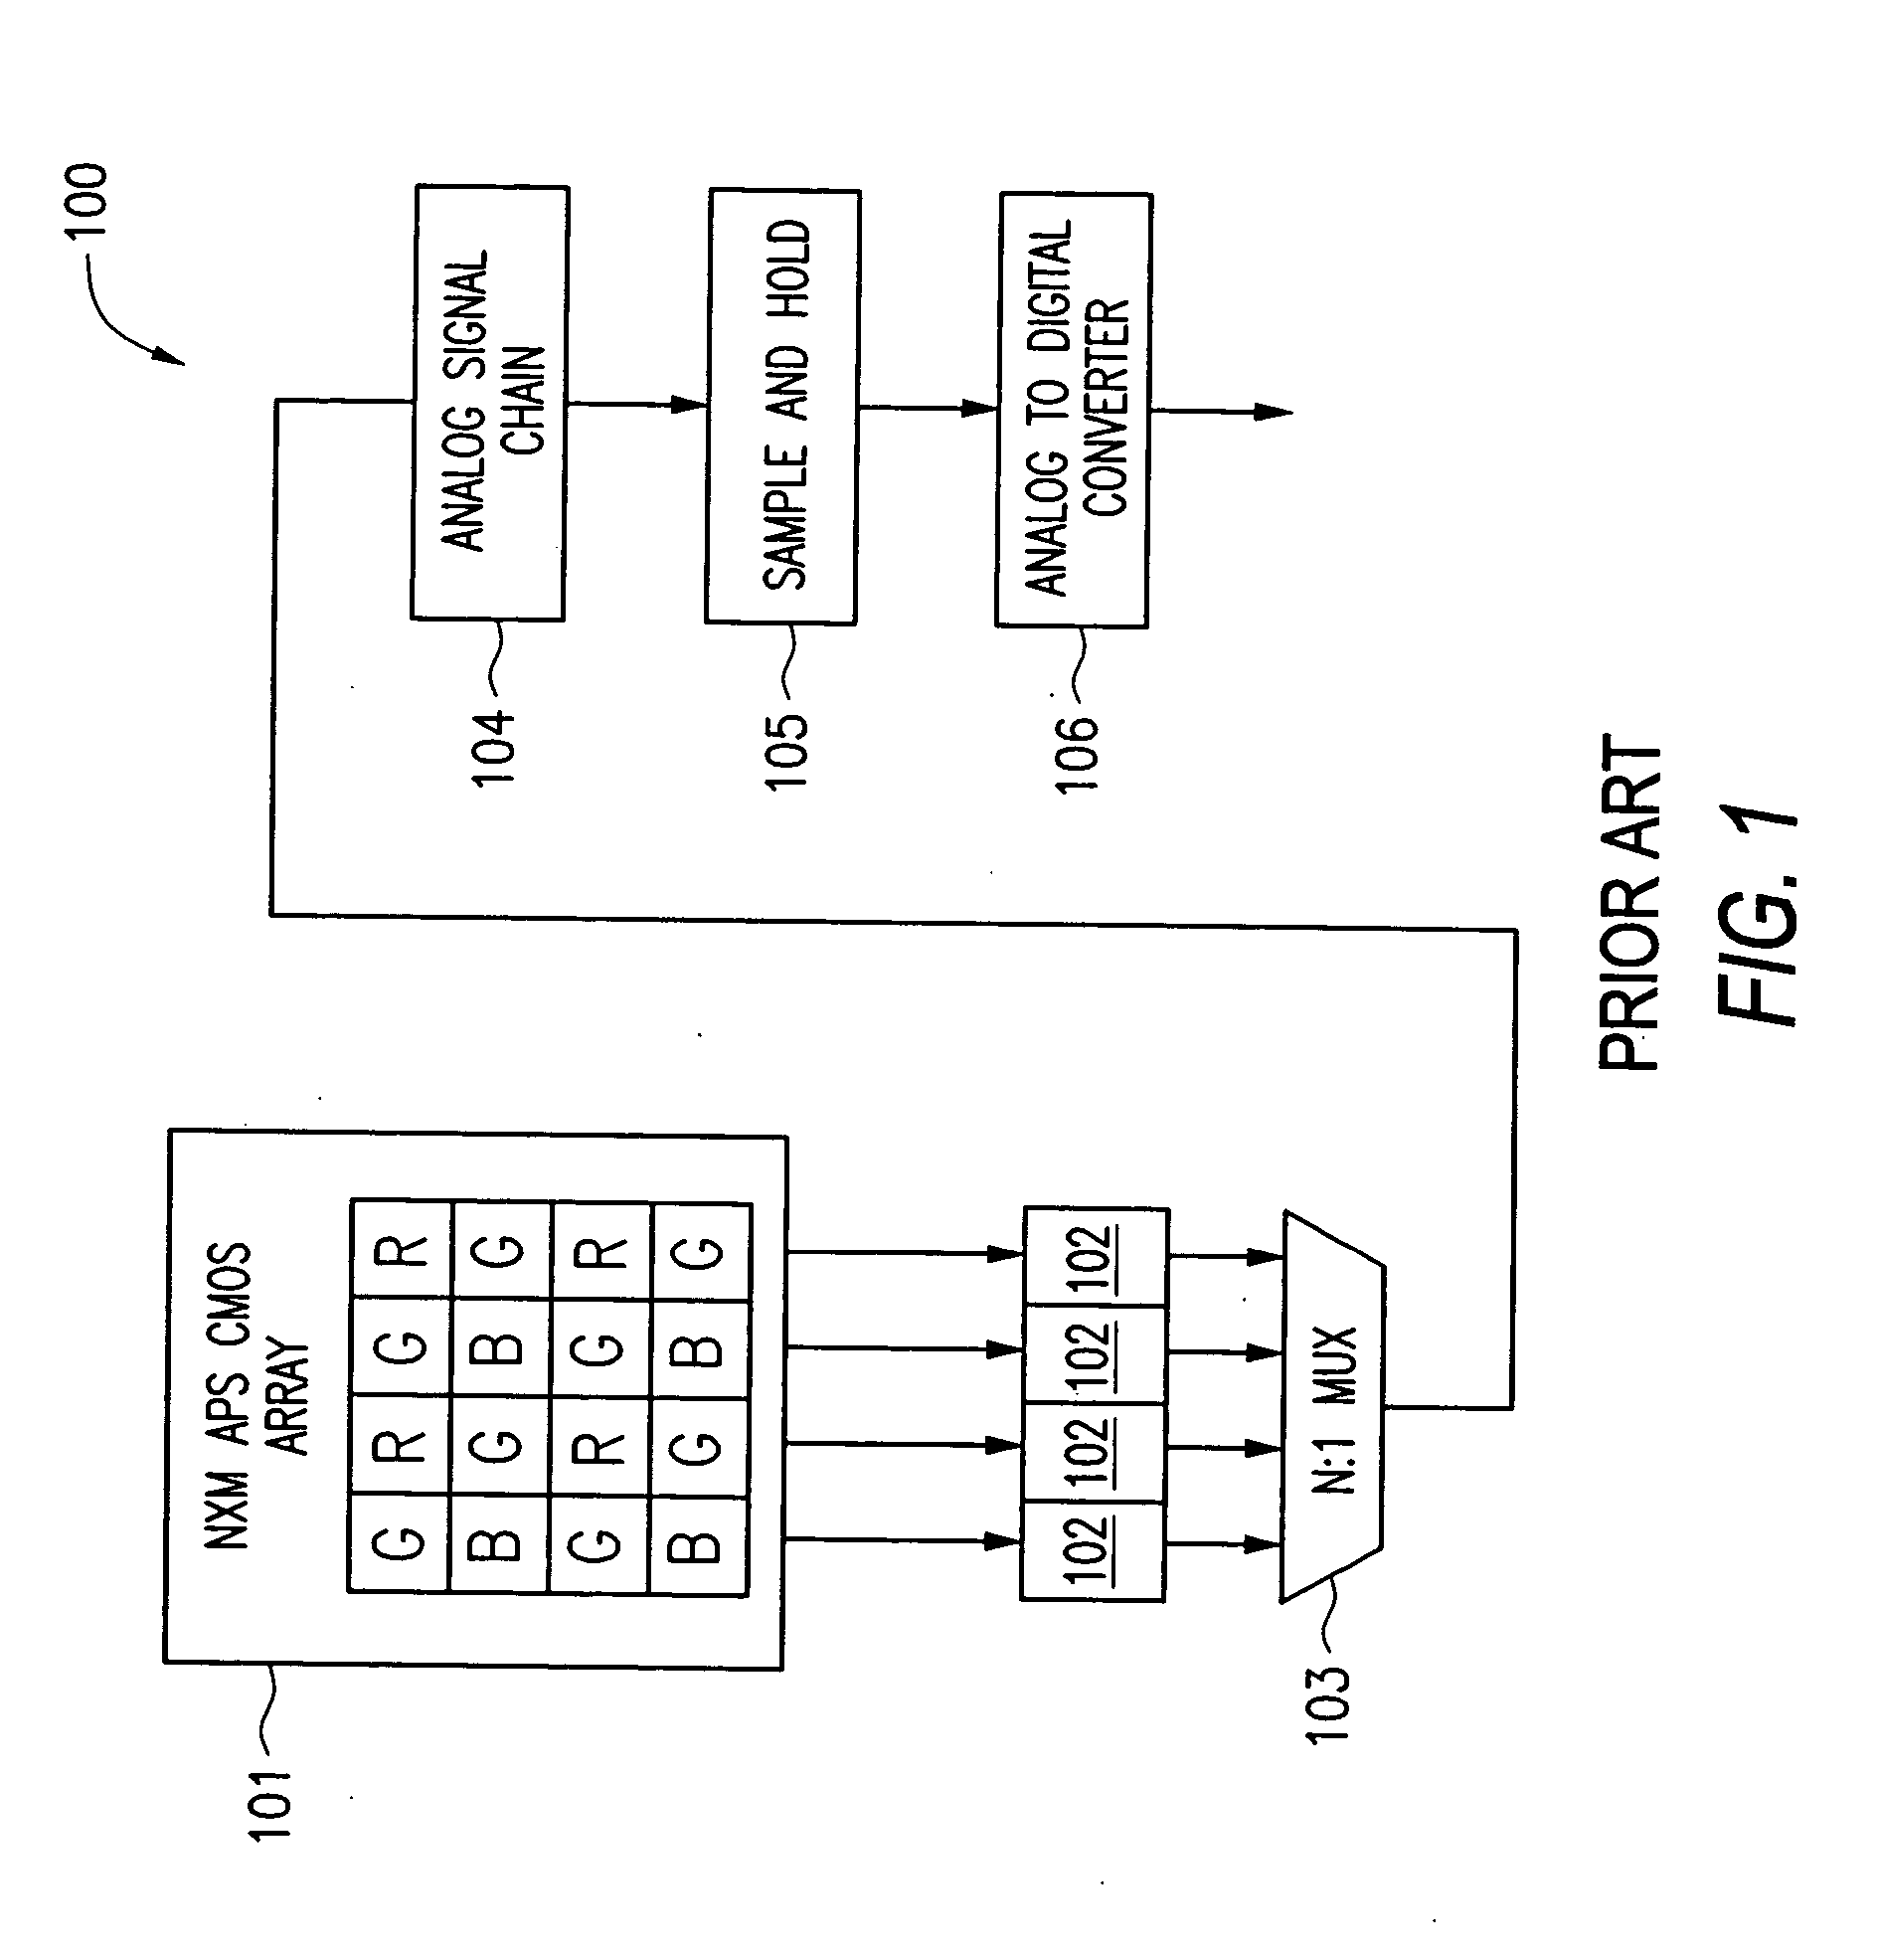 CMOS active pixel sensor with a sample and hold circuit having multiple injection capacitors and a fully differential charge mode linear synthesizer with skew control